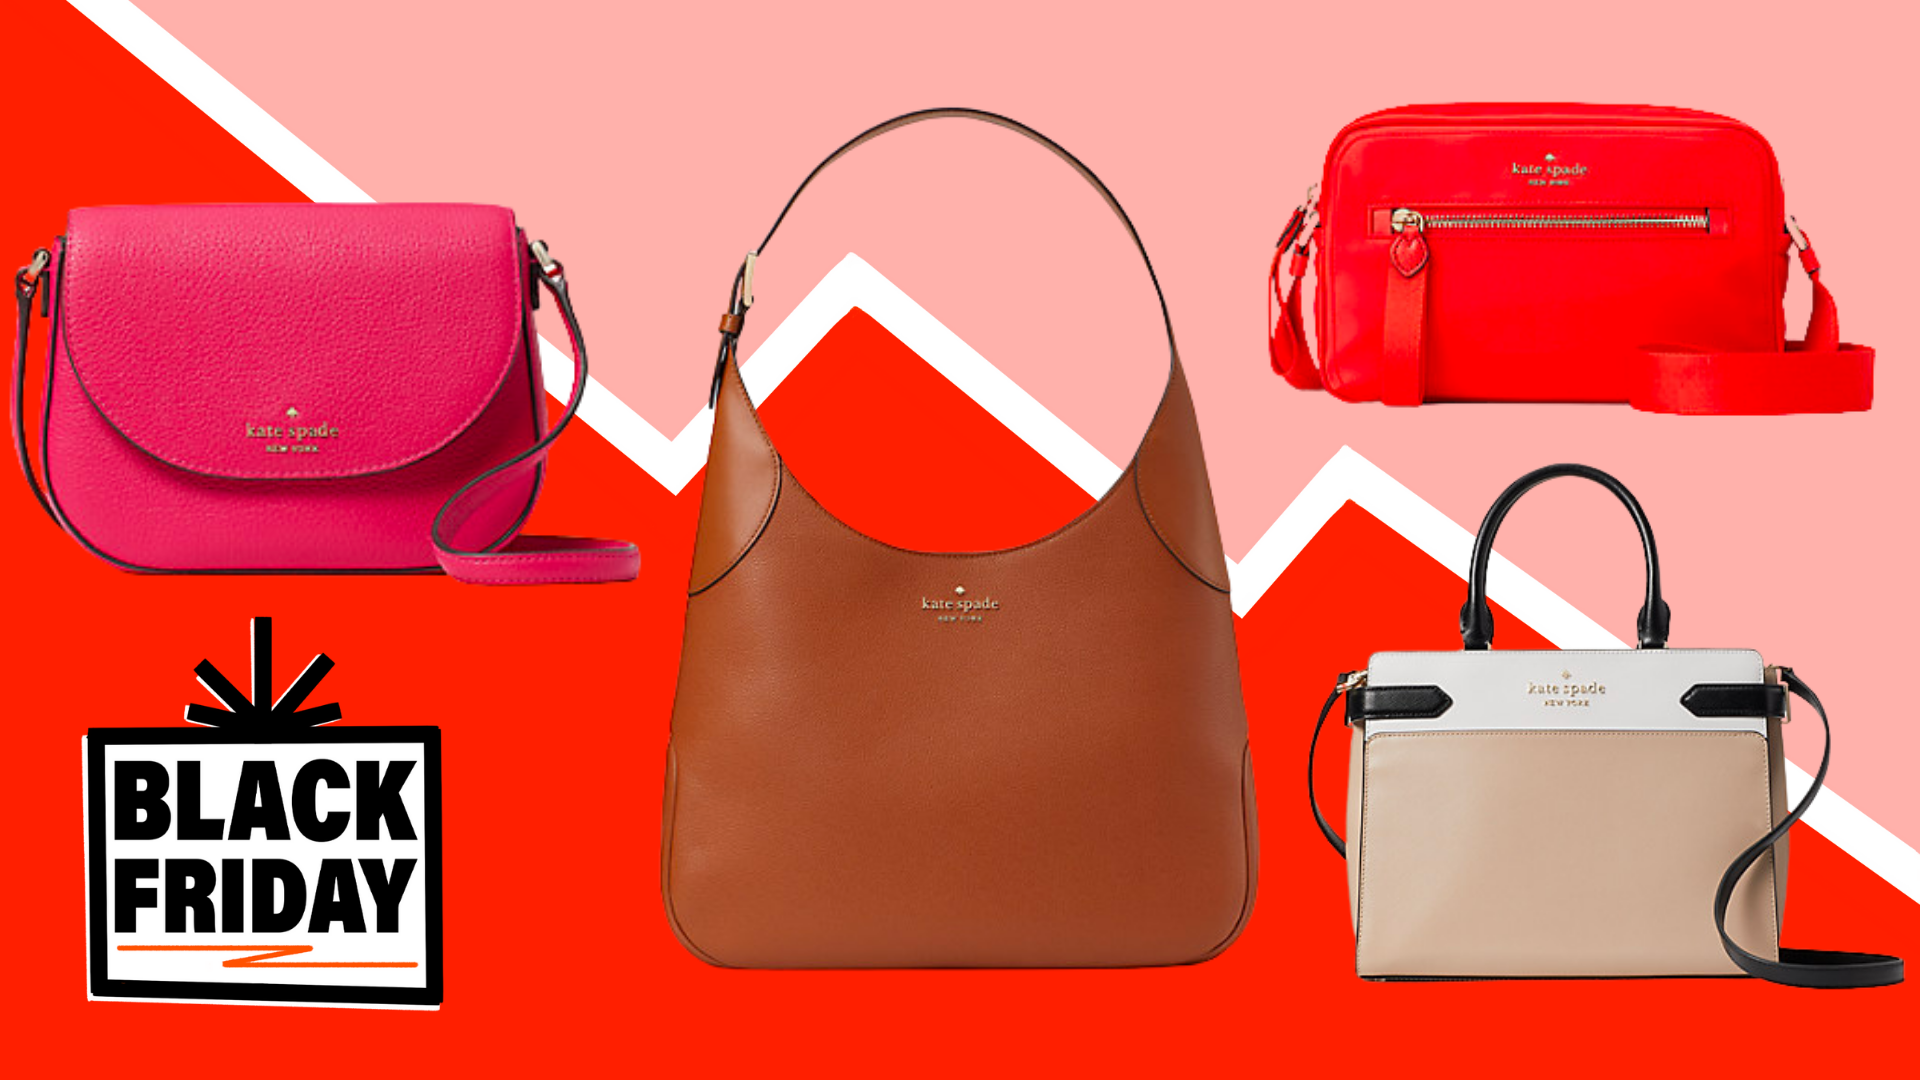 Kate Spade Black Friday isn't over yet—save big at the Surprise Sale during Cyber Monday